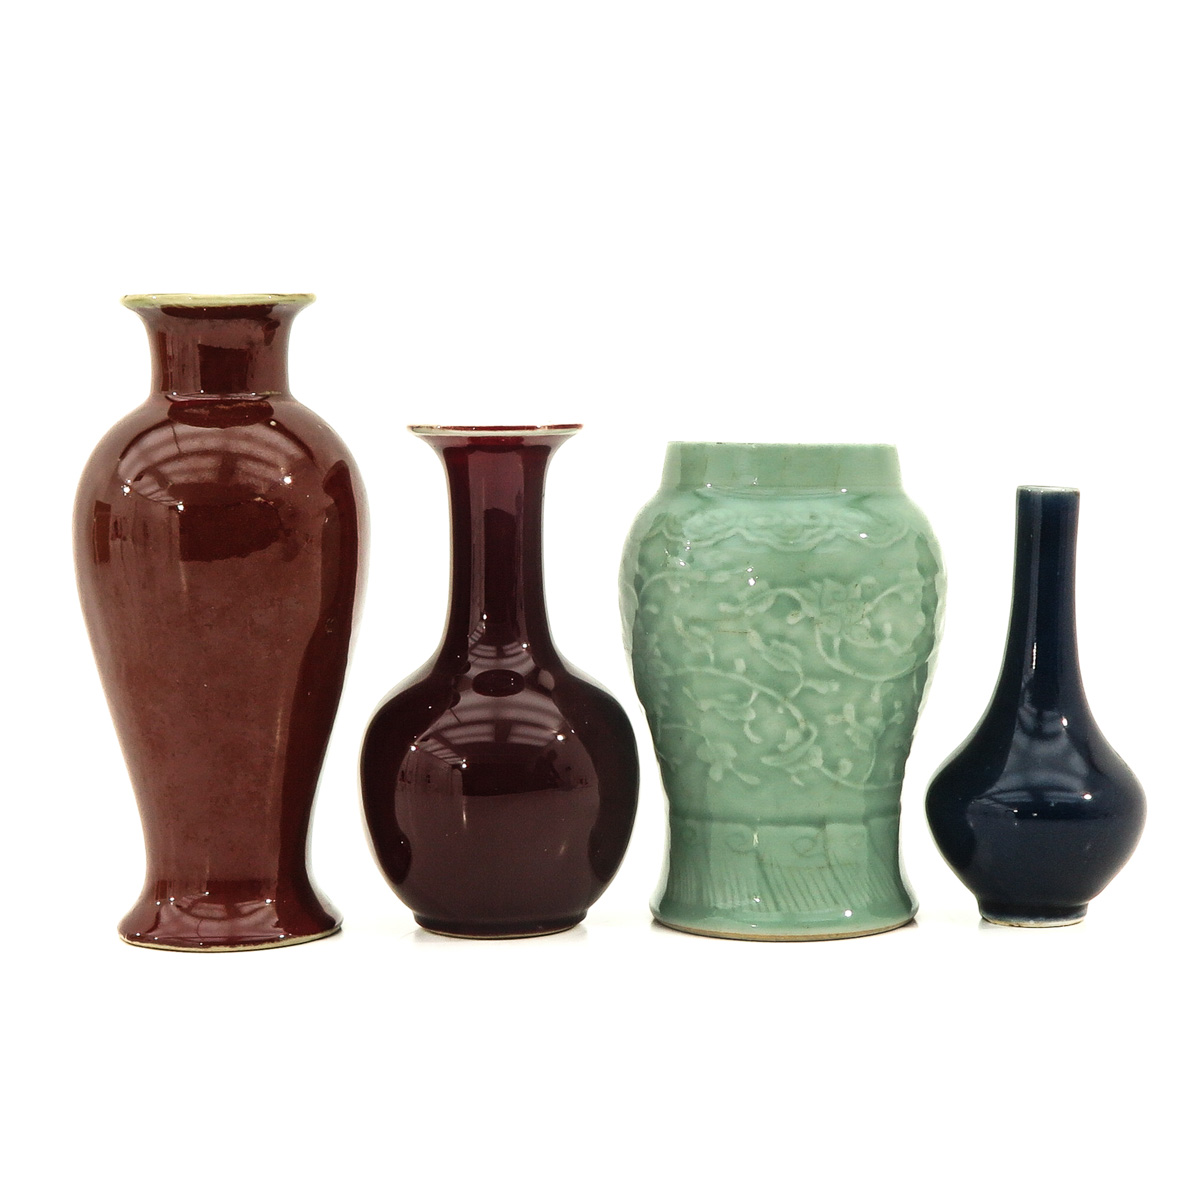 A Collection of 4 Monochrome Decor Vases - Image 4 of 10